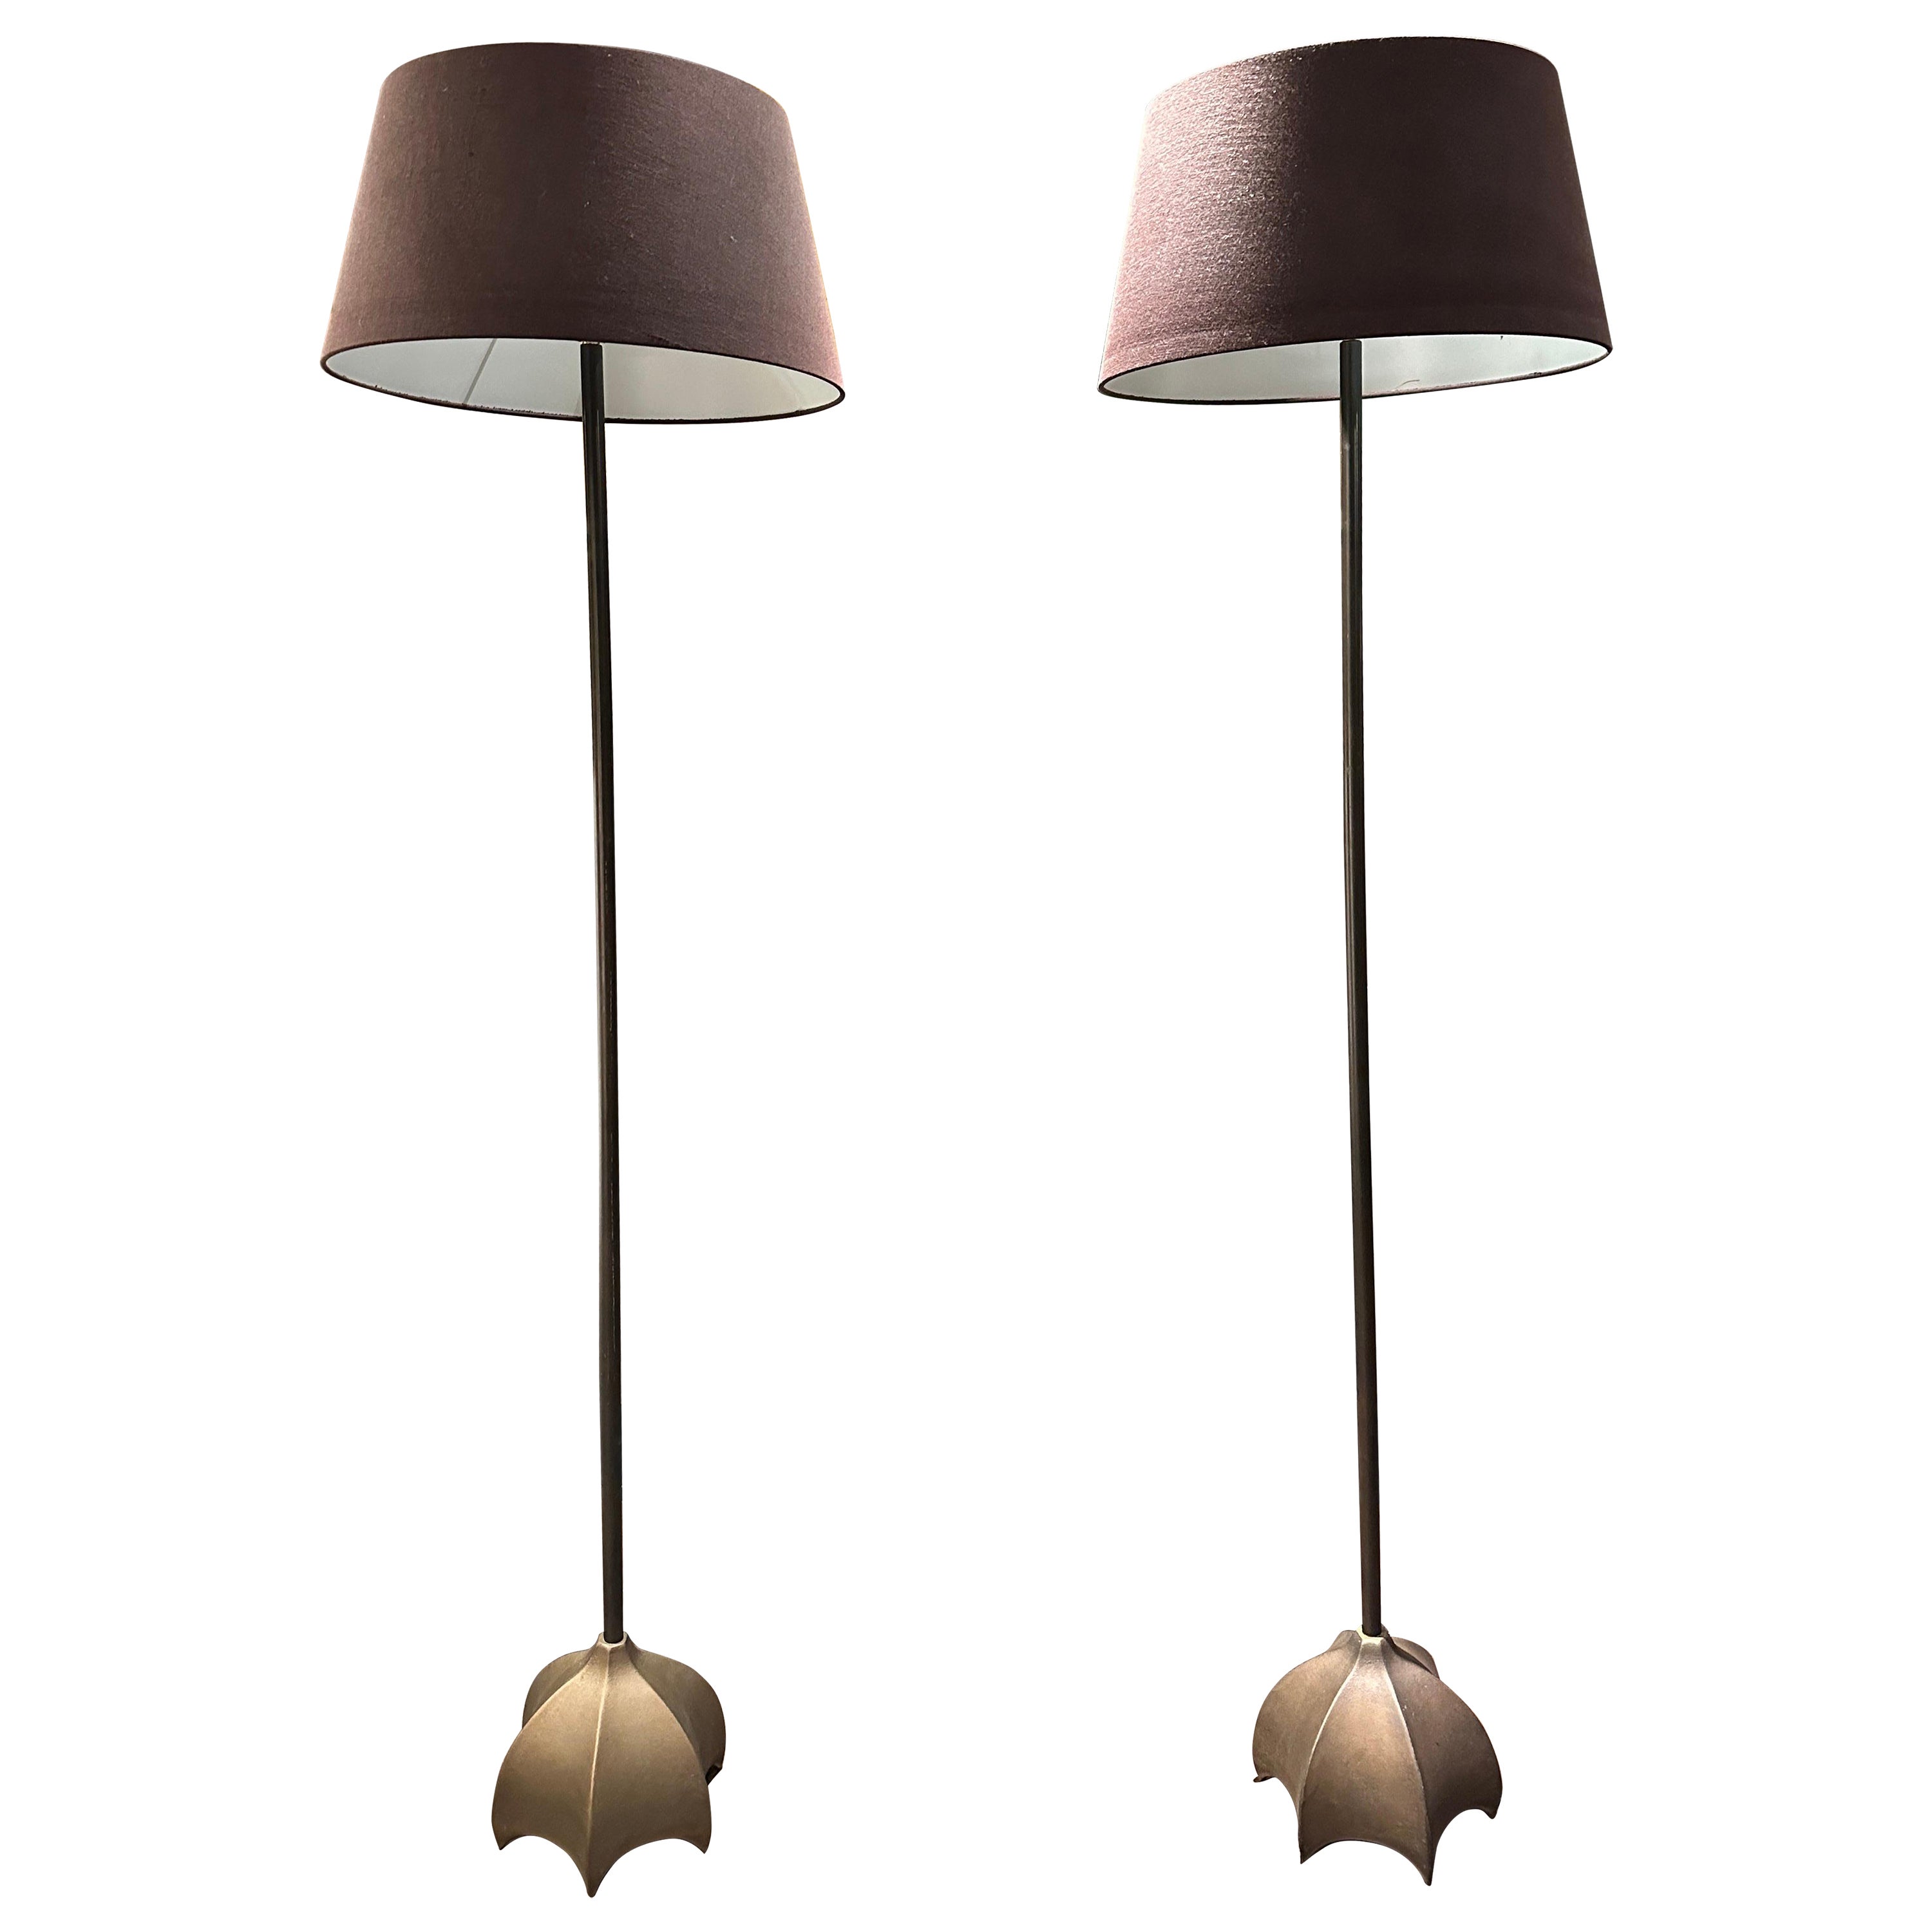 A Pair Of Bronze Floor Lamps By Jan Des Bouvrie For Quasar  For Sale